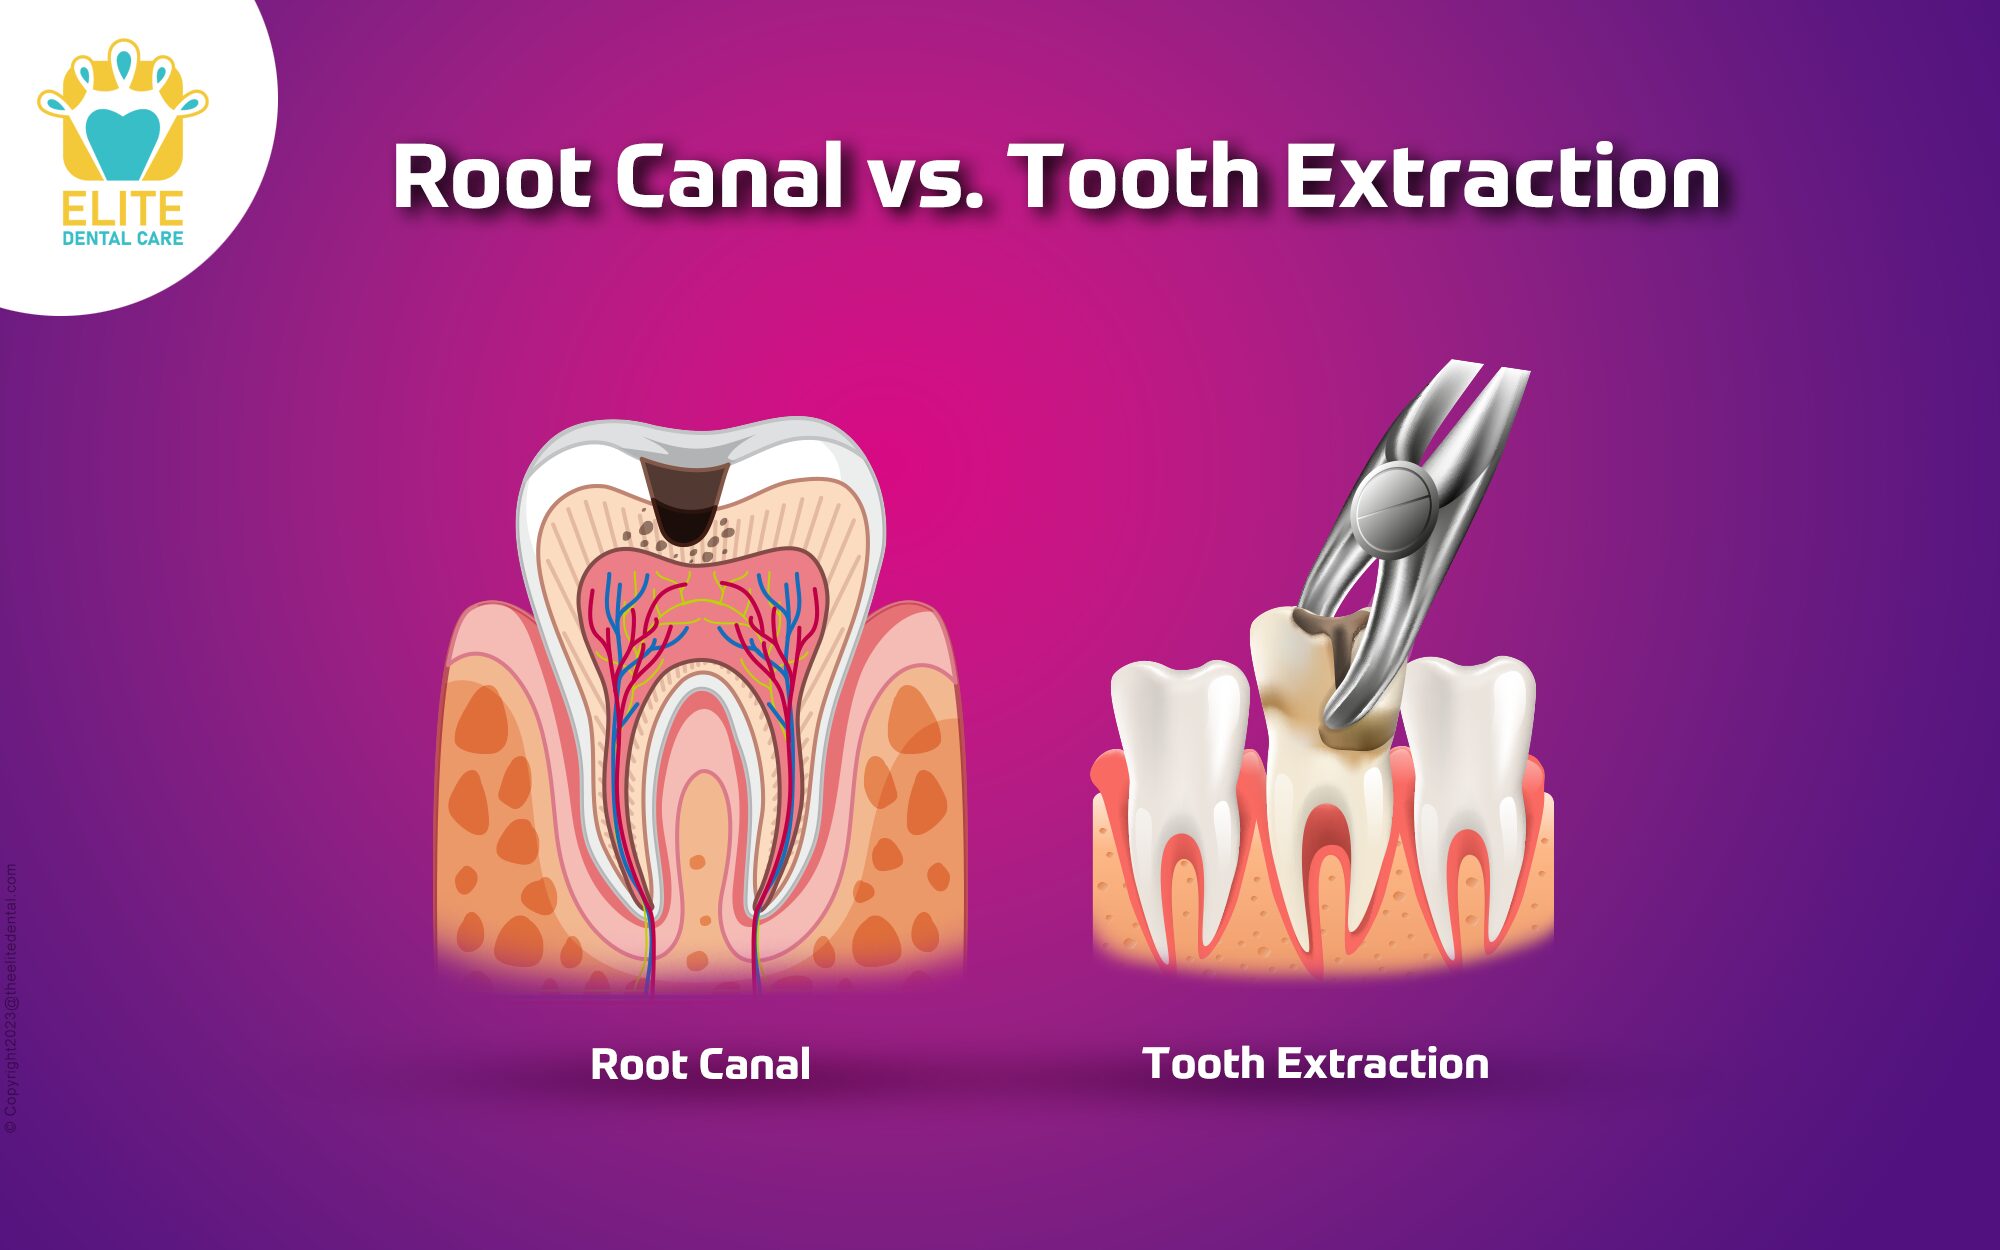 Root Canal vs. Tooth Extraction